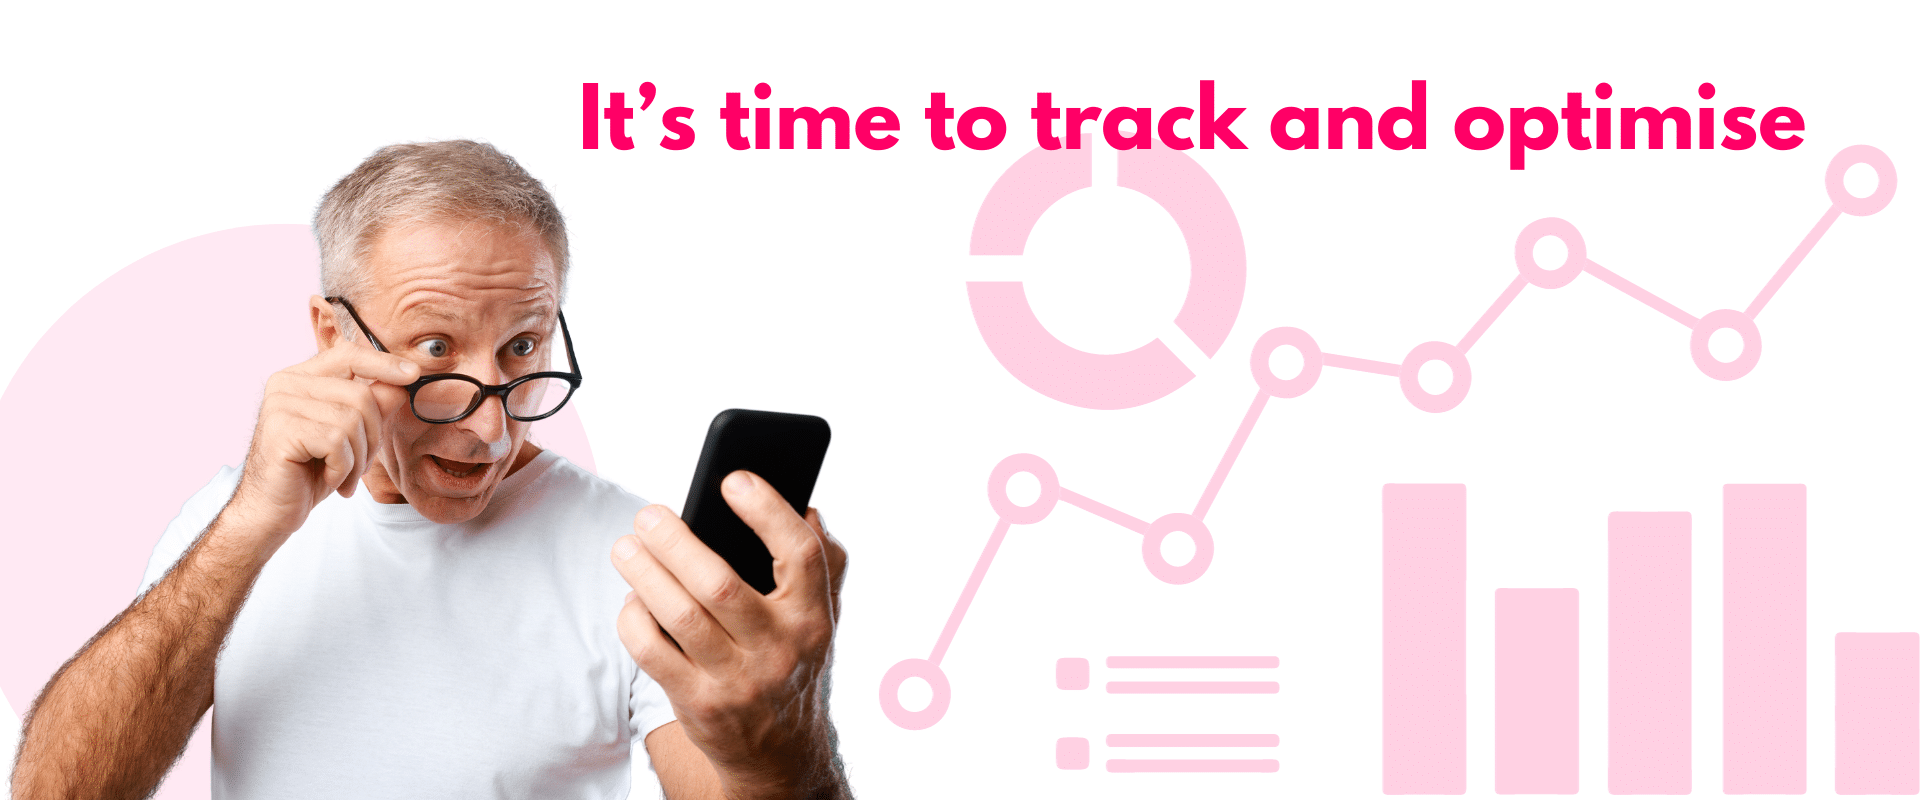 It's time to track and optimize.